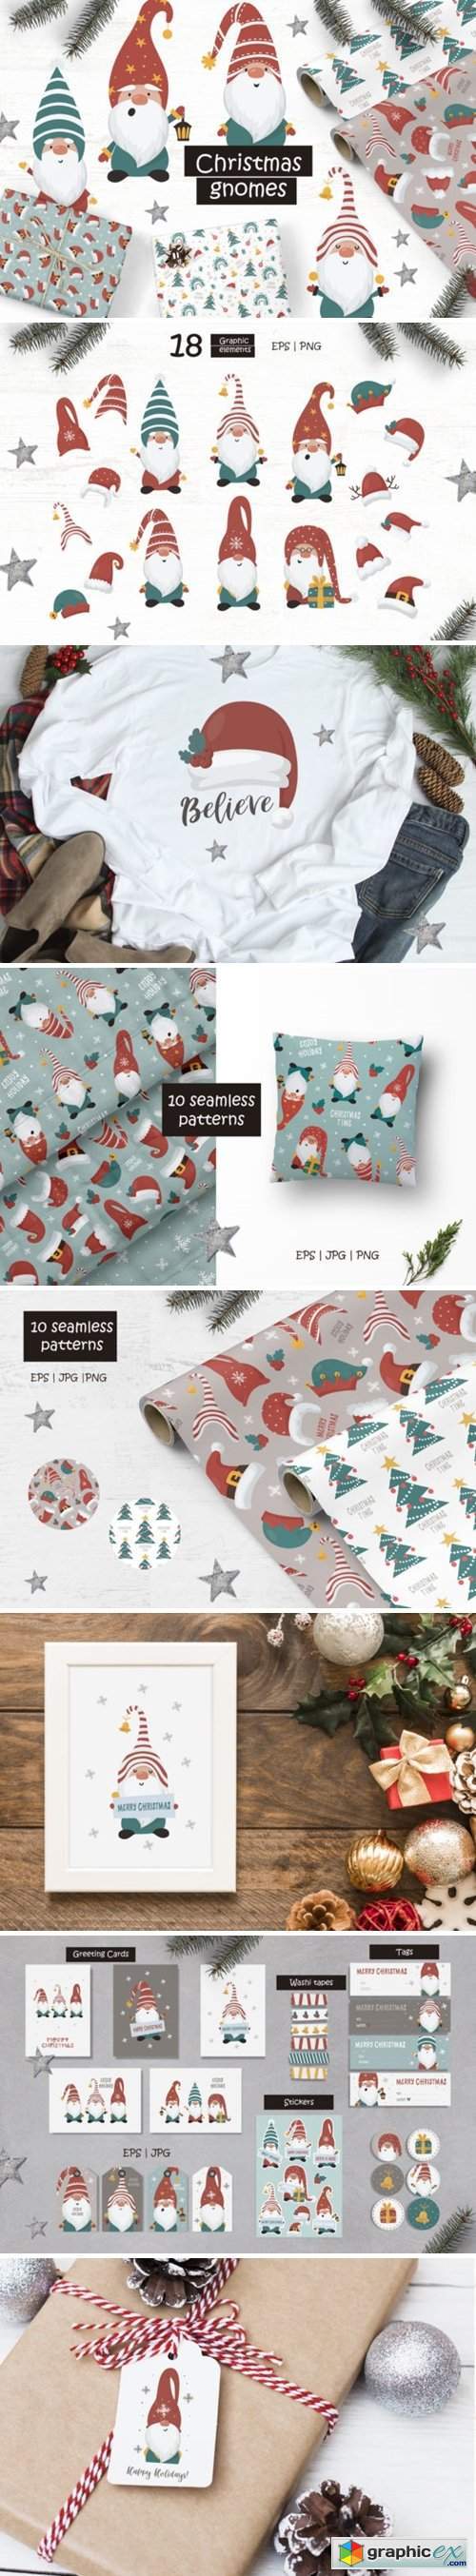 Christmas Gnomes and Patterns